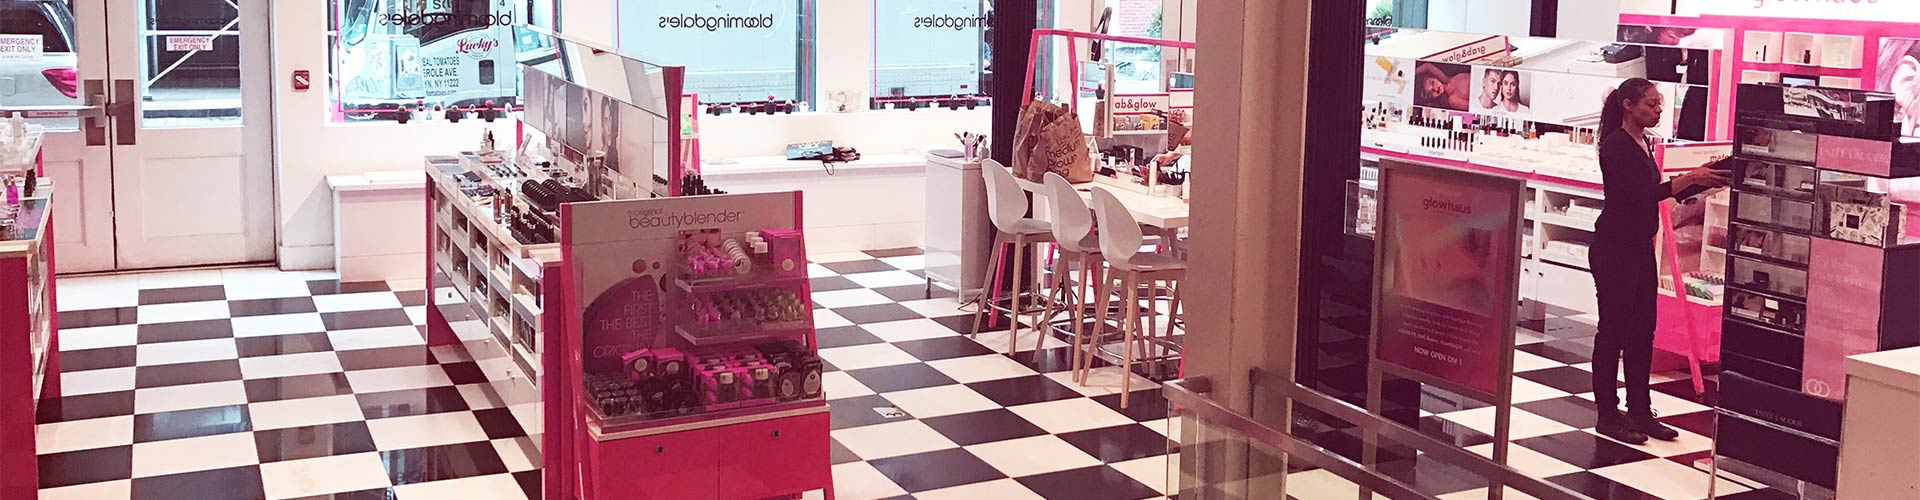 Blog banner featuring inside of a Bloomingdales with worker tending to the displays